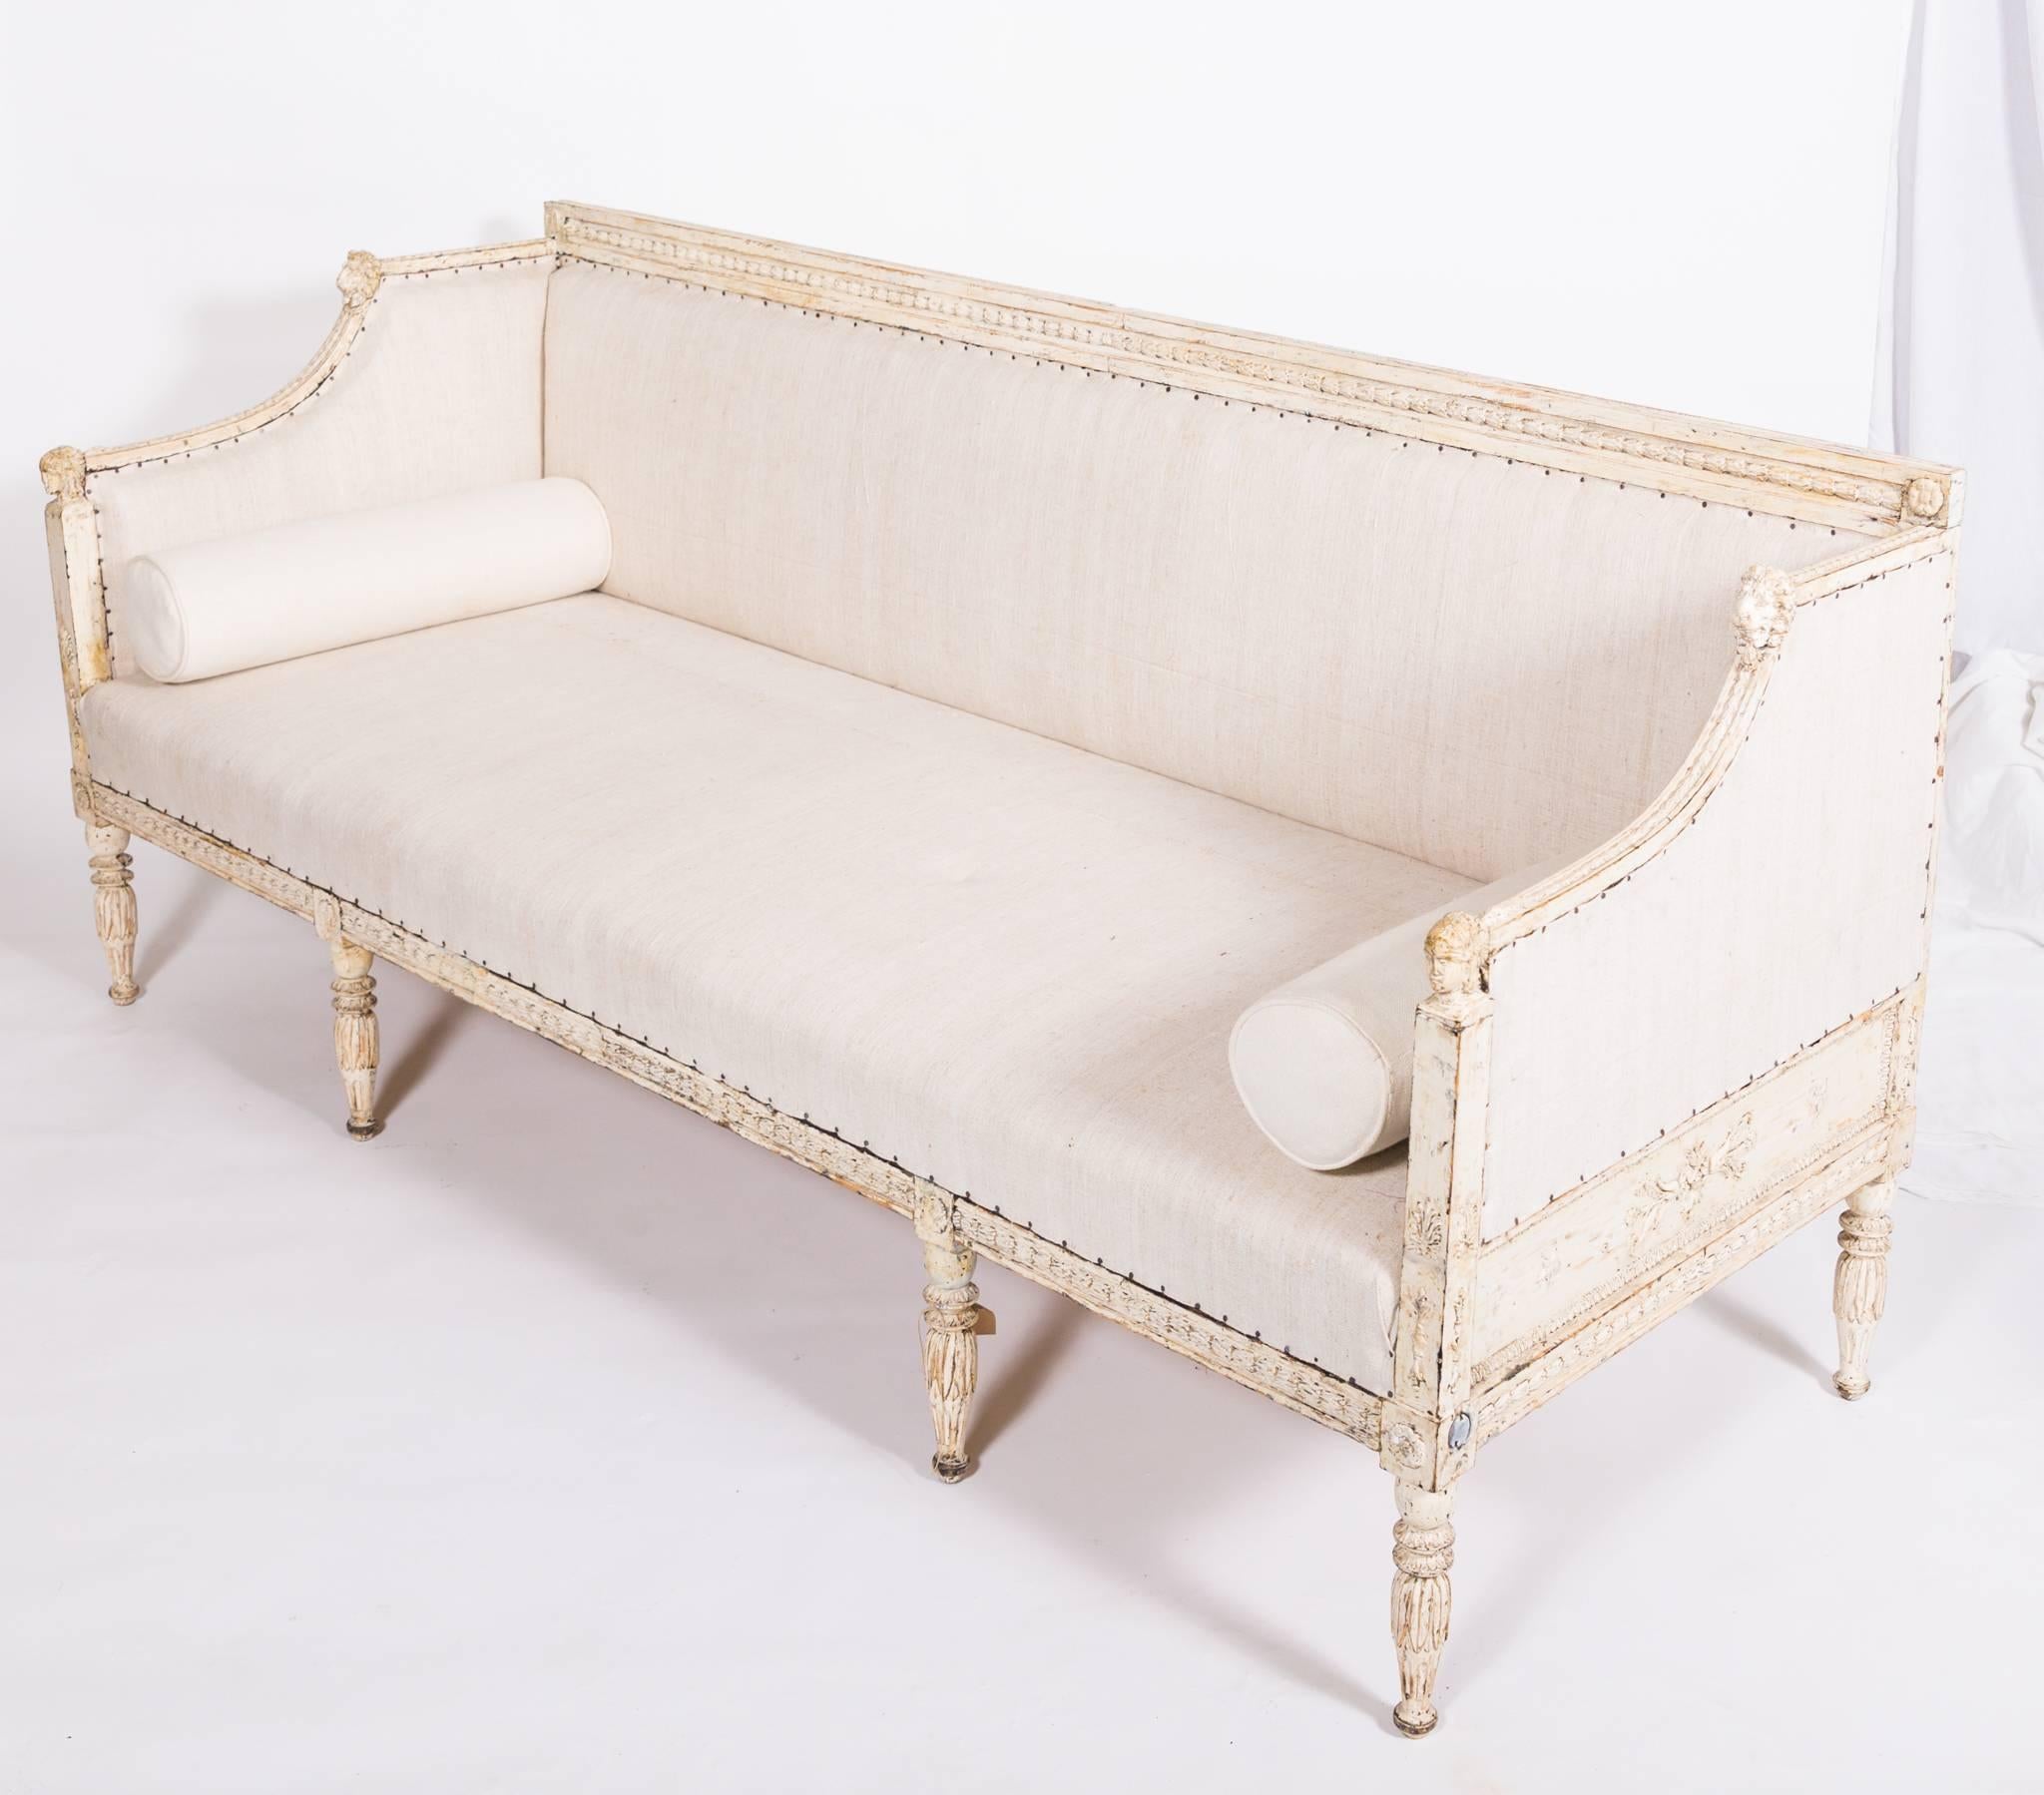 Neoclassical 18c Swedish Sofa with Lion Carving and Egyptian Influence